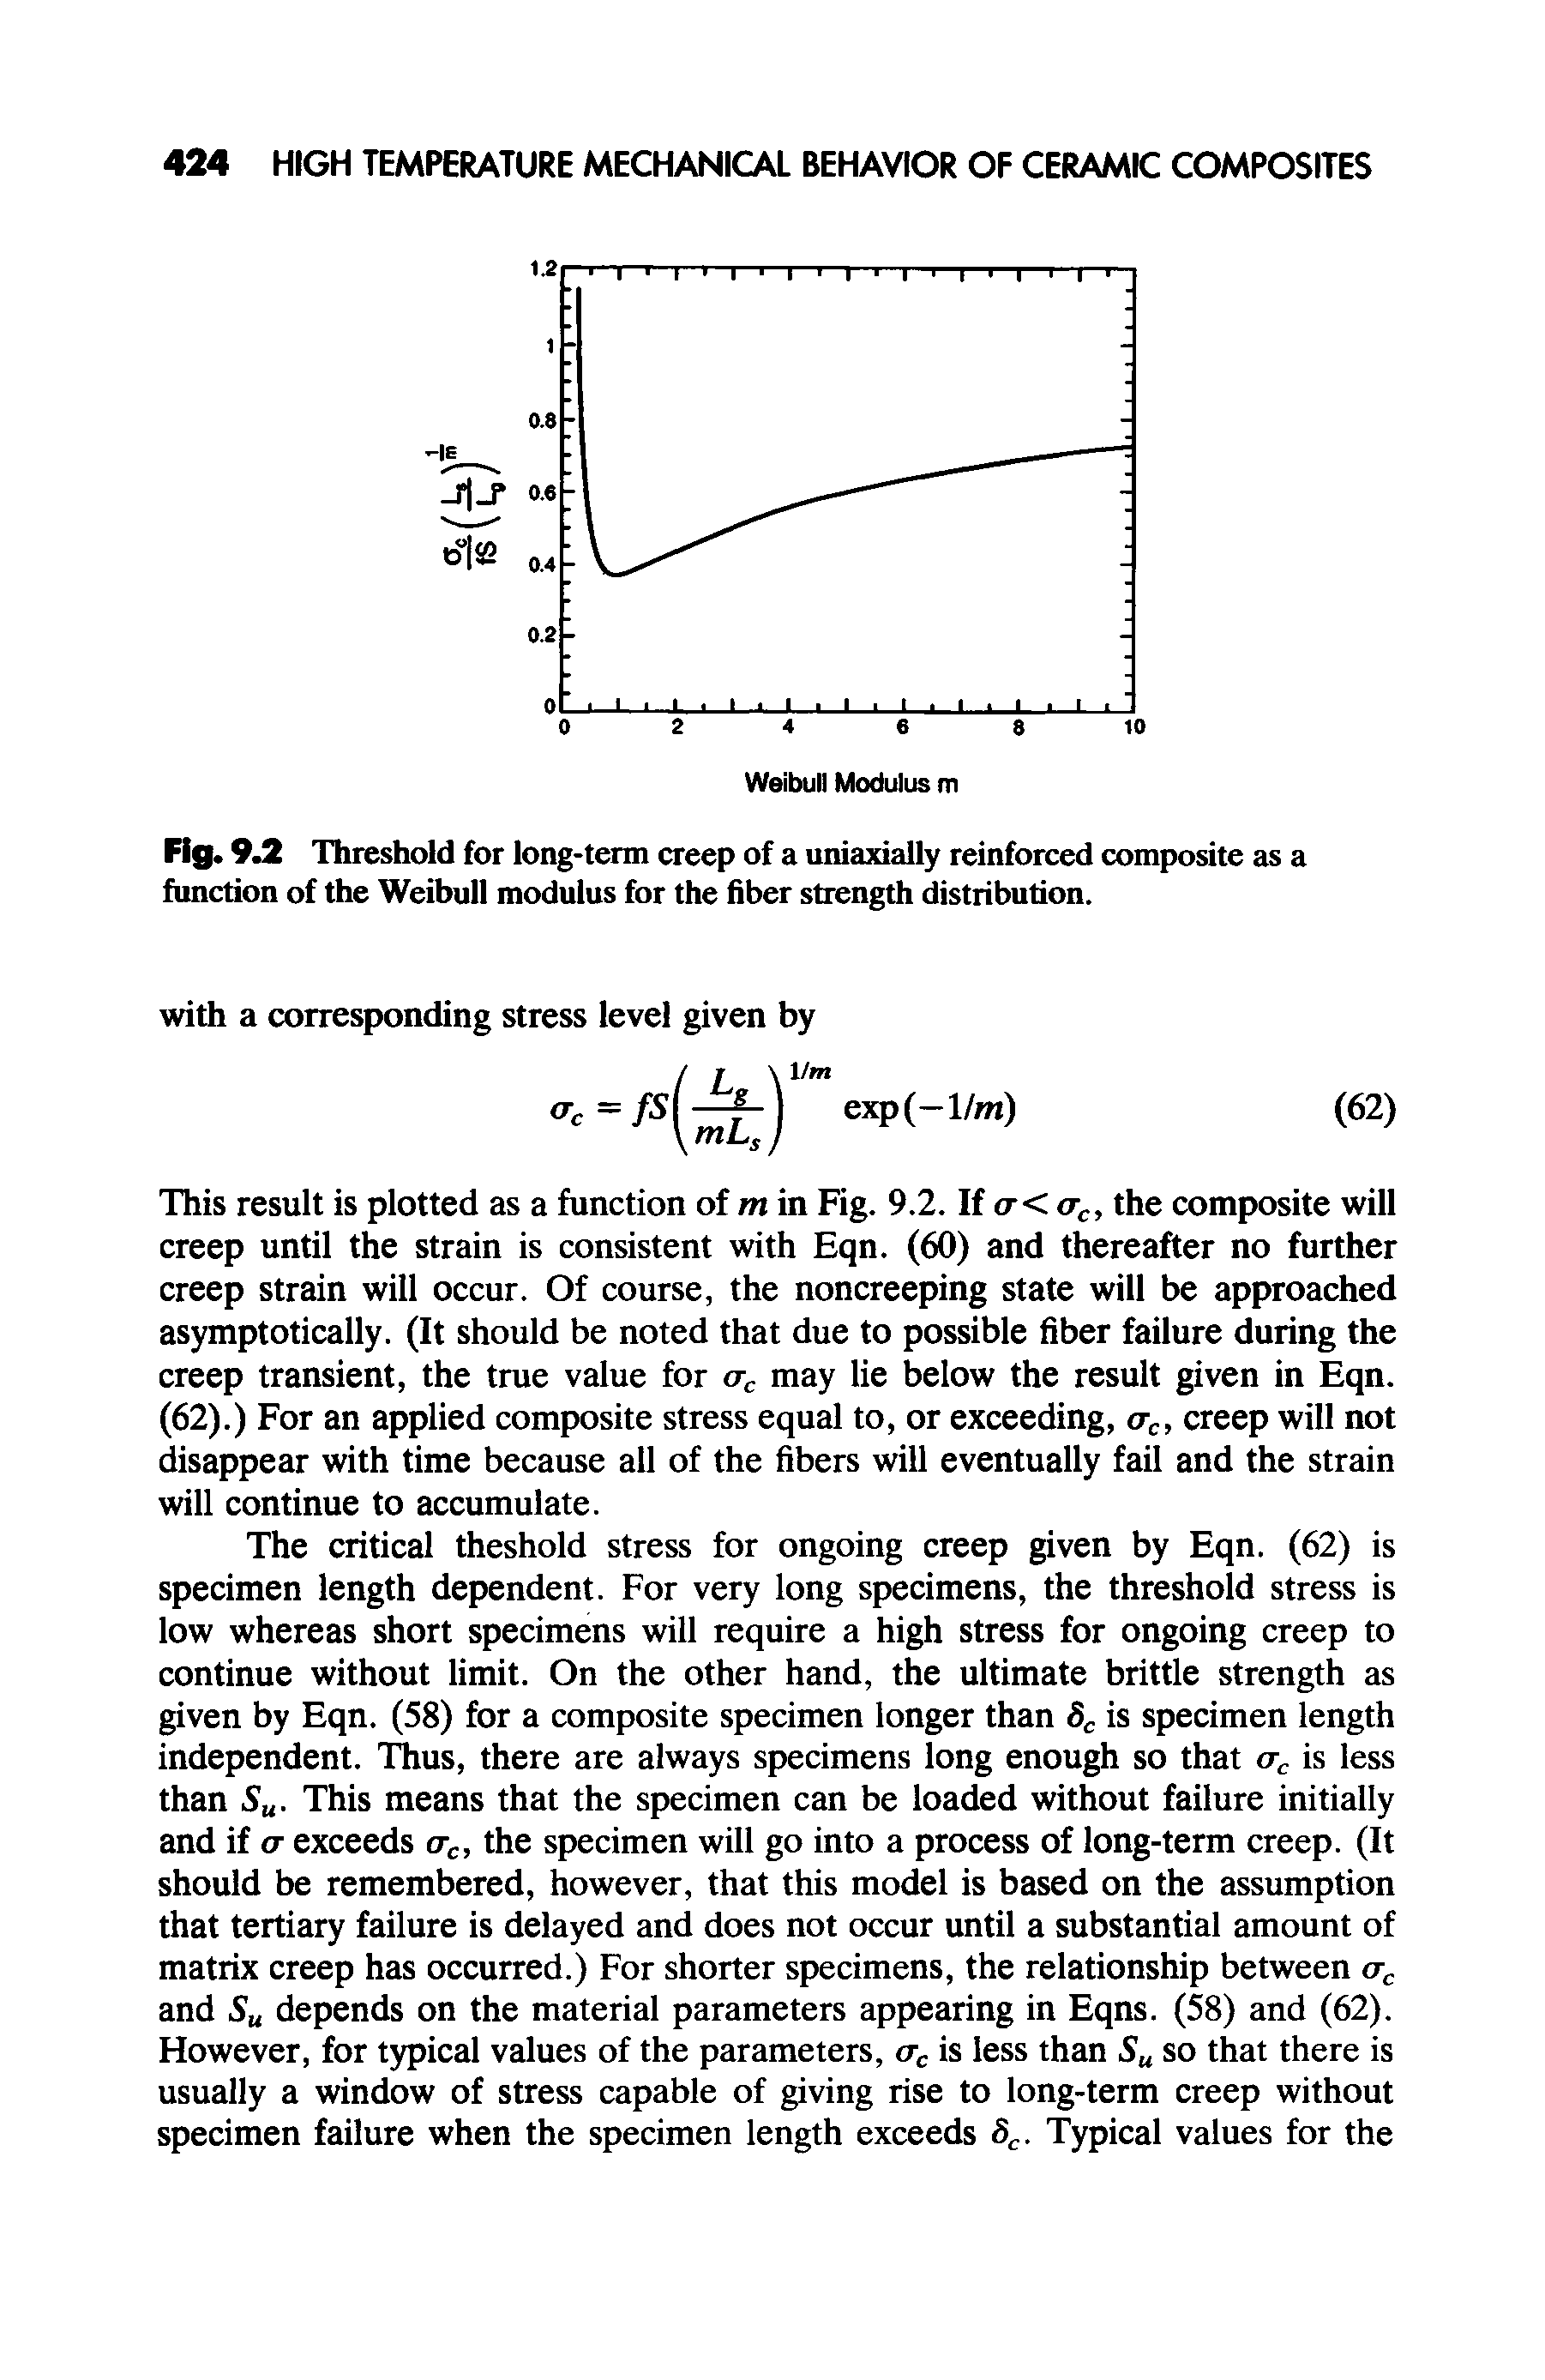 Fig. 9.2 Threshold for long-term creep of a uniaxially reinforced composite as a function of the Weibull modulus for the fiber strength distribution.